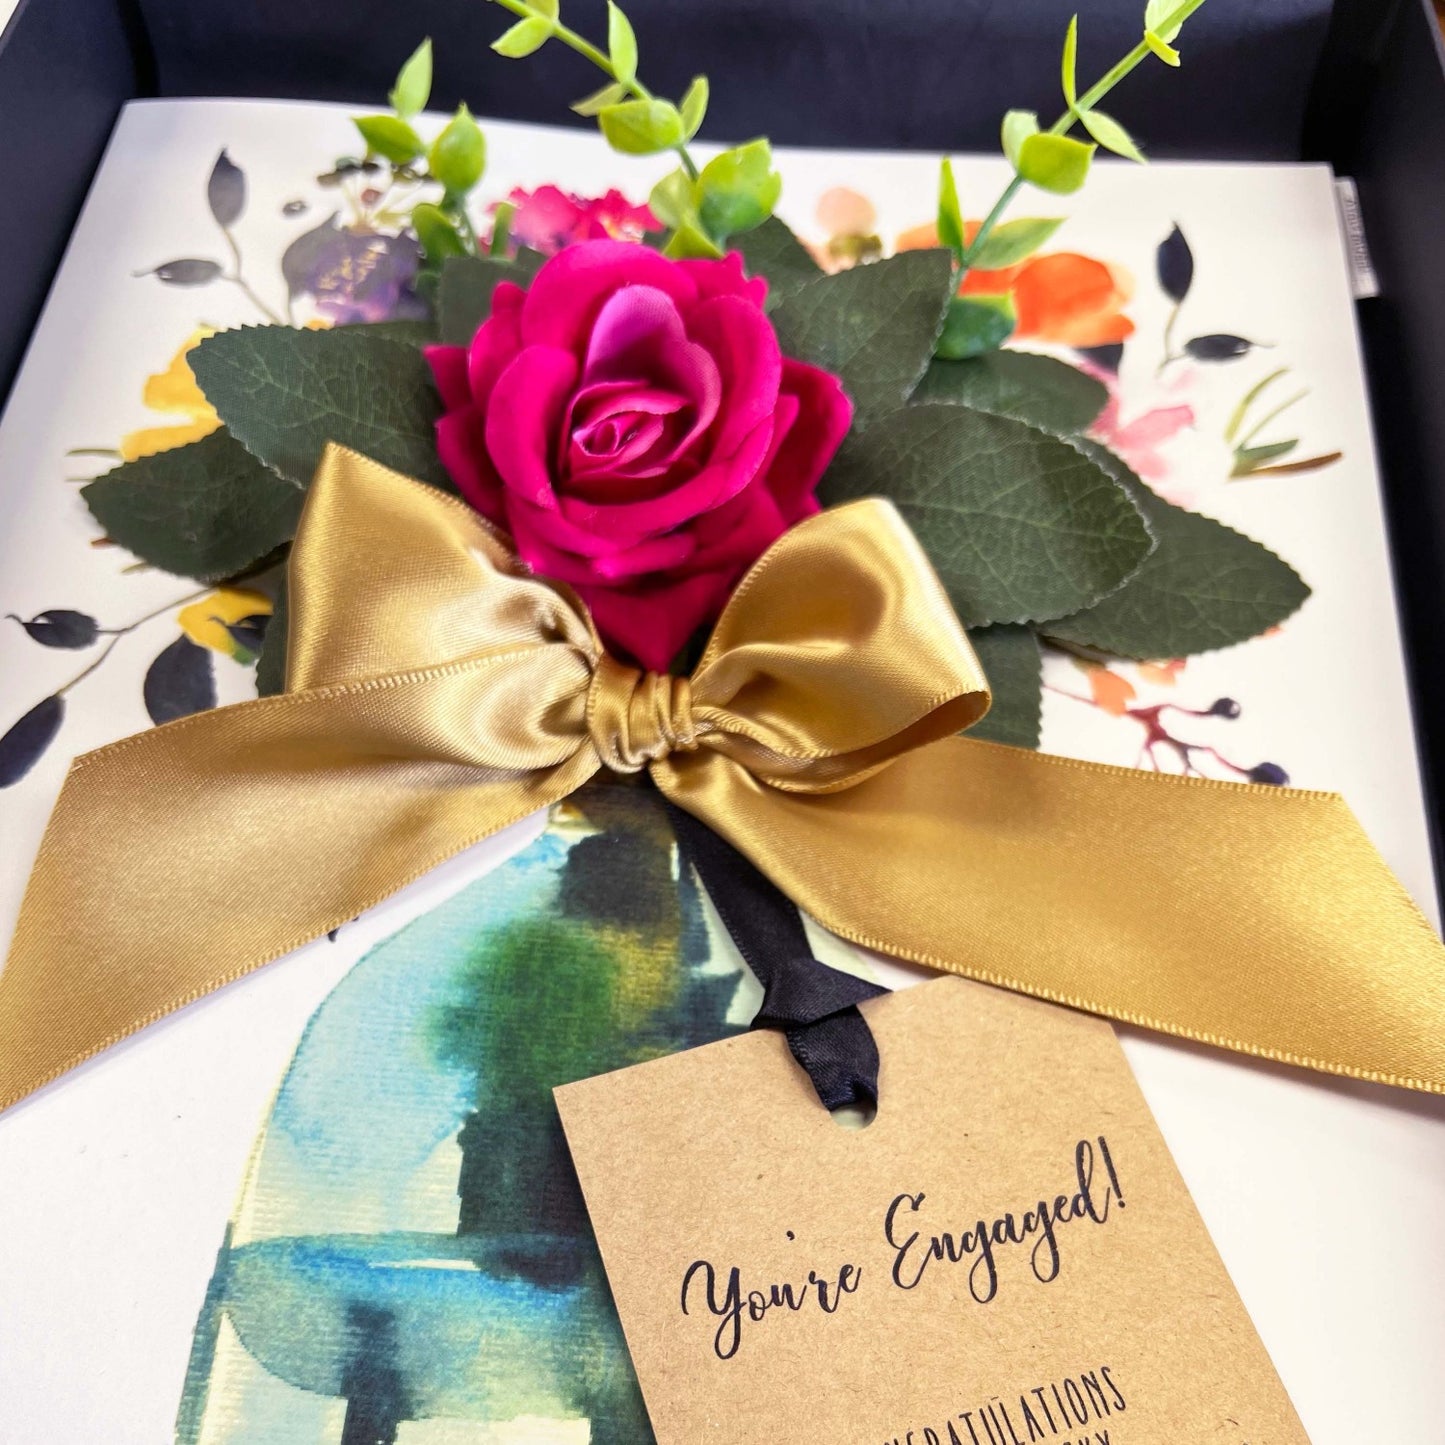 Luxury Bloom Engagement Card personalised with message on tag and handmade with luxury everlasting scented rose and bouquet design.